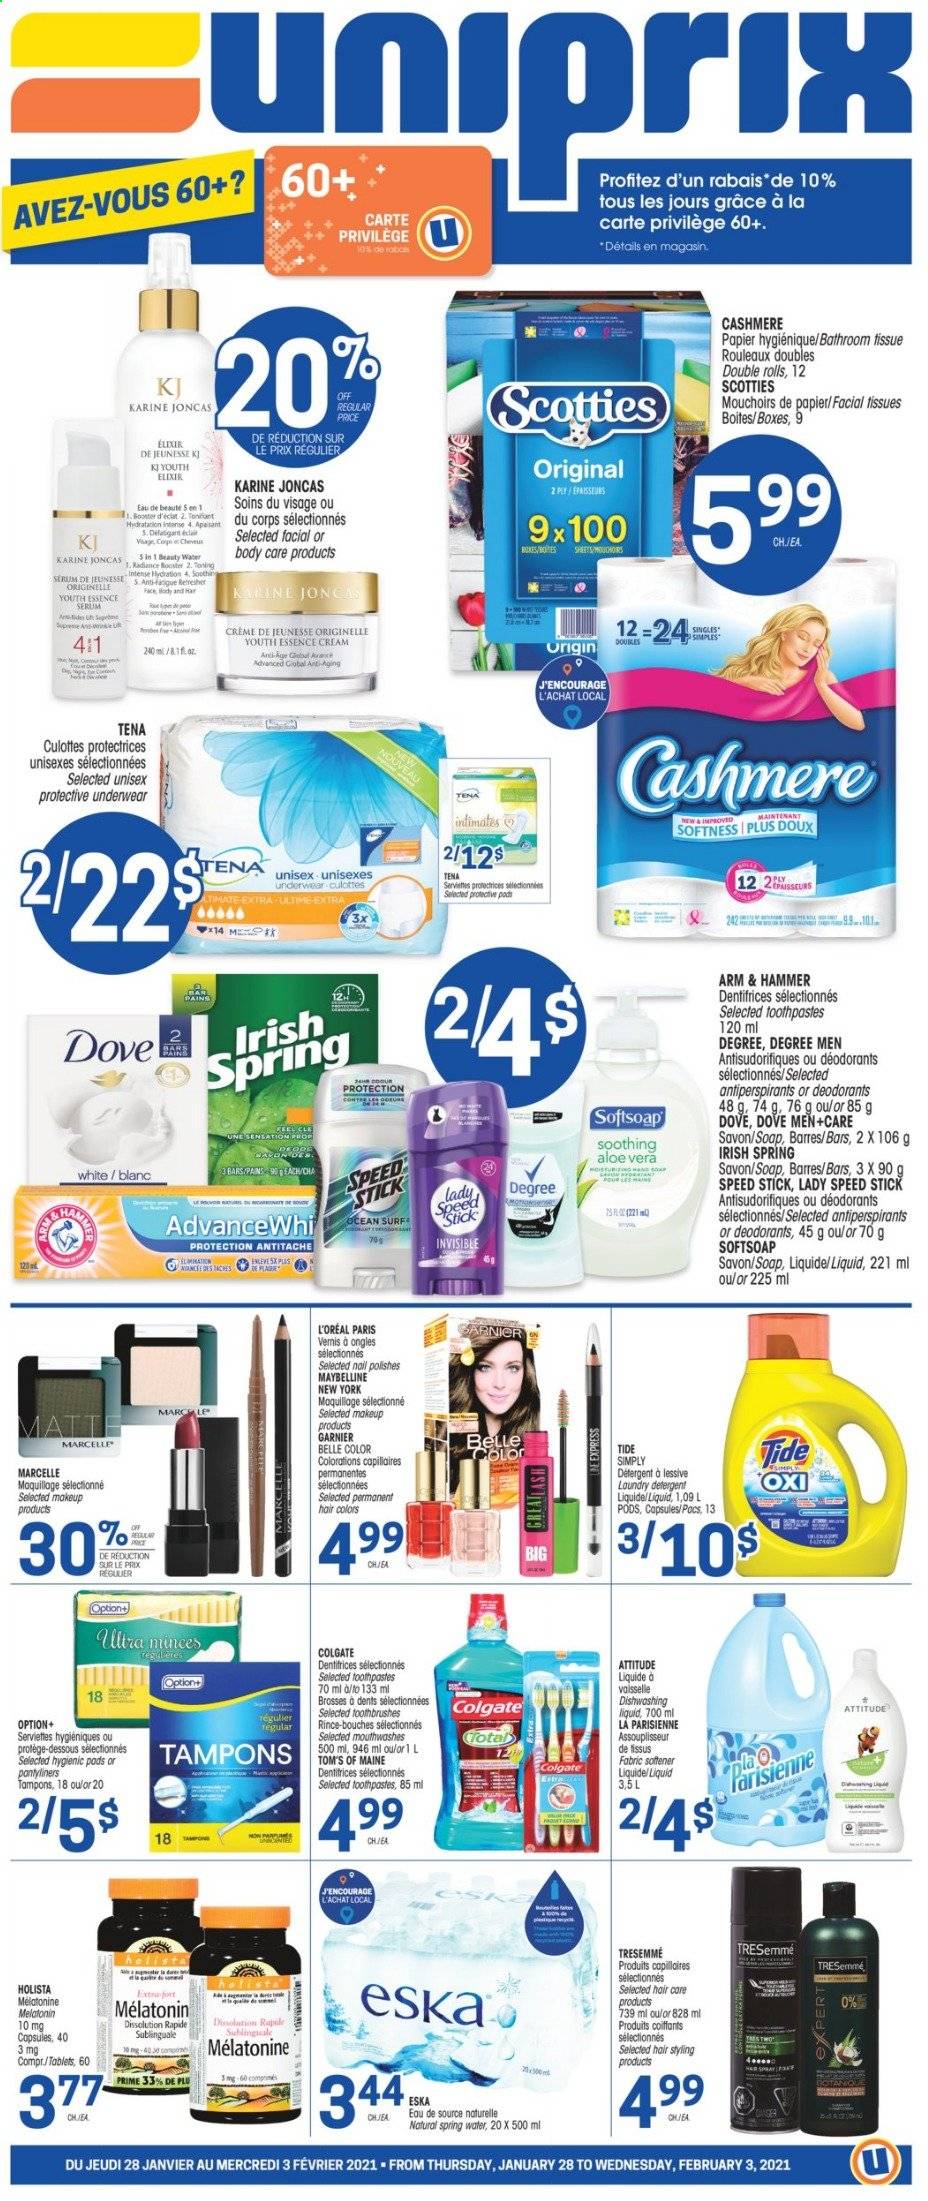 thumbnail - Uniprix Flyer - January 28, 2021 - February 03, 2021 - Sales products - ARM & HAMMER, spring water, bath tissue, Tide, fabric softener, dishwashing liquid, Softsoap, soap, pantyliners, tampons, facial tissues, L’Oréal, serum, refresher, TRESemmé, Eclat, Speed Stick, makeup, Melatonin, Garnier, Maybelline, Tena Lady, deodorant. Page 1.